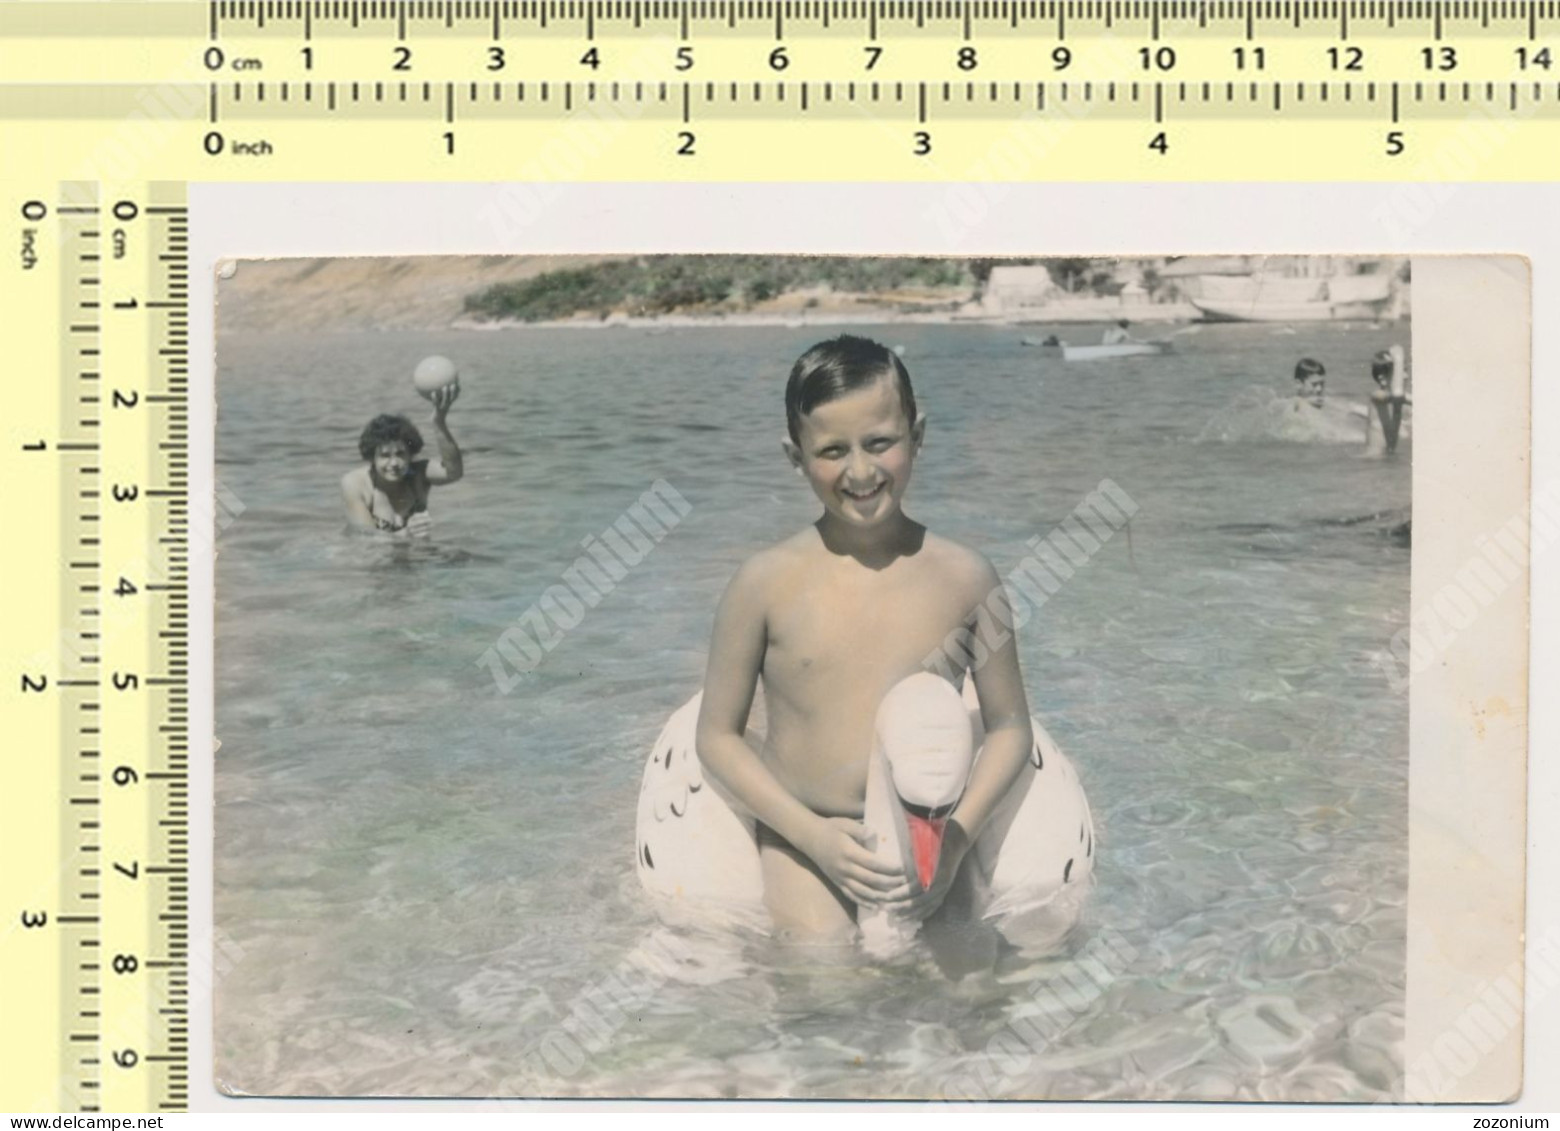 REAL PHOTO Boy Sitting On Inflatable Swan On Beach Garcon Assise Sur Cygne Gonflable Plage Colored Photo SNAPSHOT - Anonieme Personen